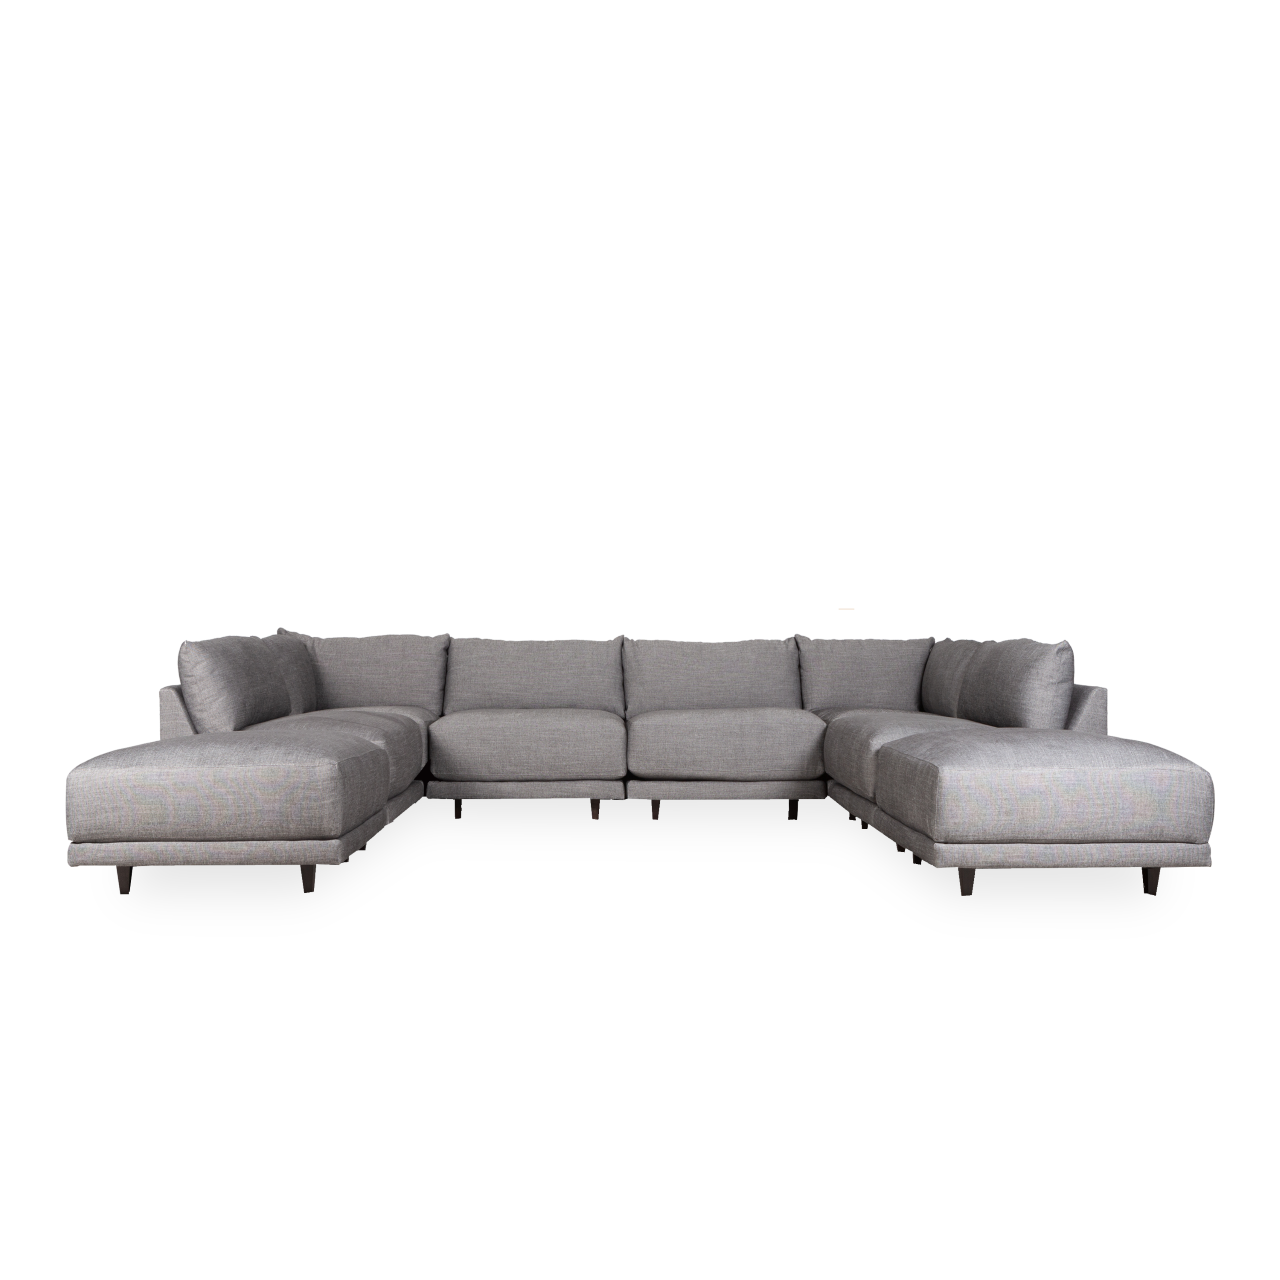 With a modern design and low profile, the Saint Modular Sectional features plush cushioning and offers superior comfort for your lounging needs.